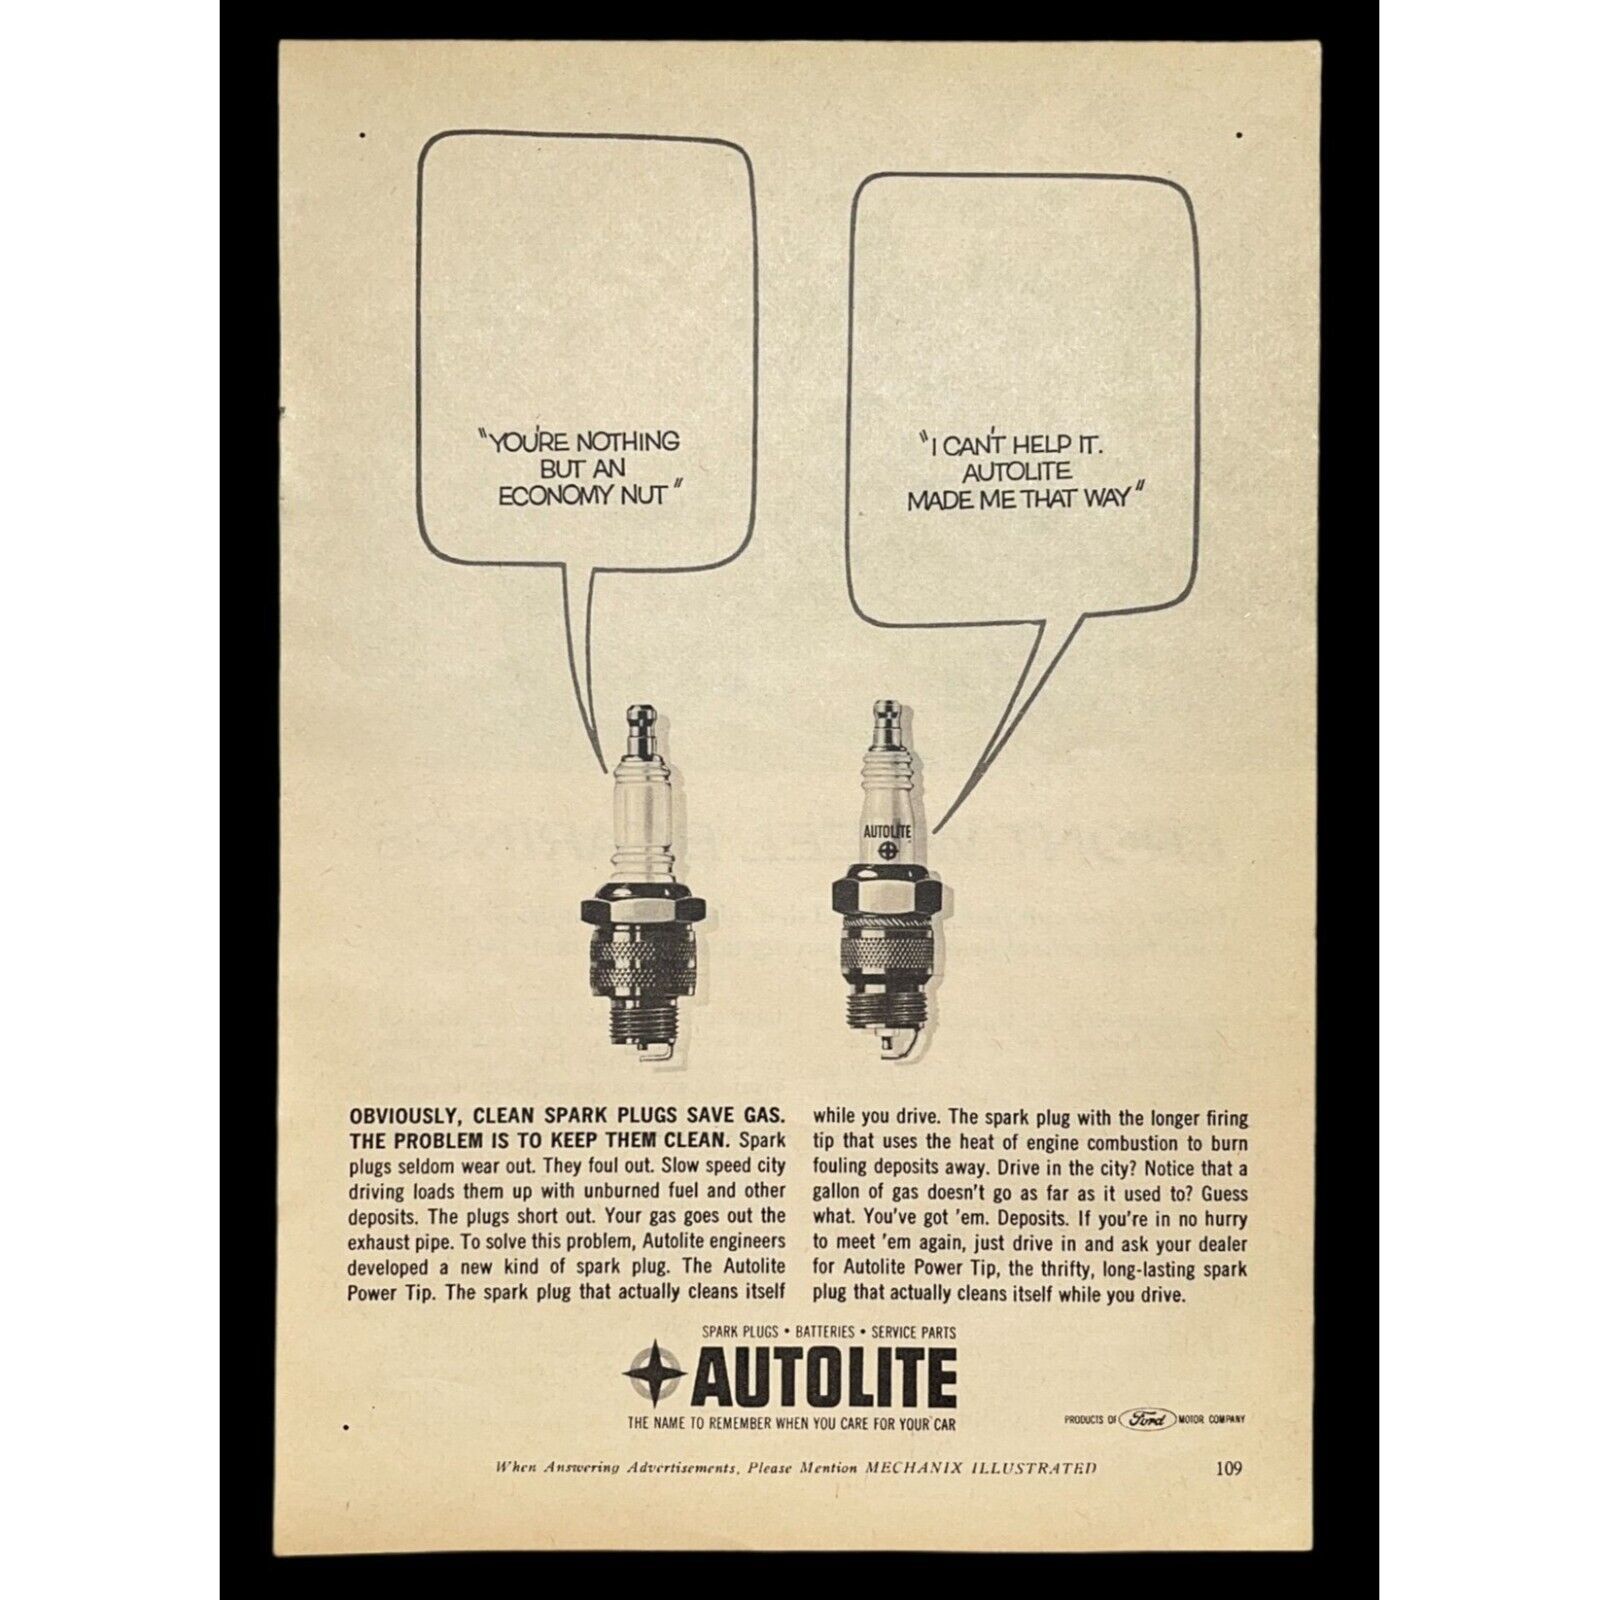 Primary image for Ford Autolite Spark Plugs Print Ad Vintage 1963 Automotive Repair Car Racing